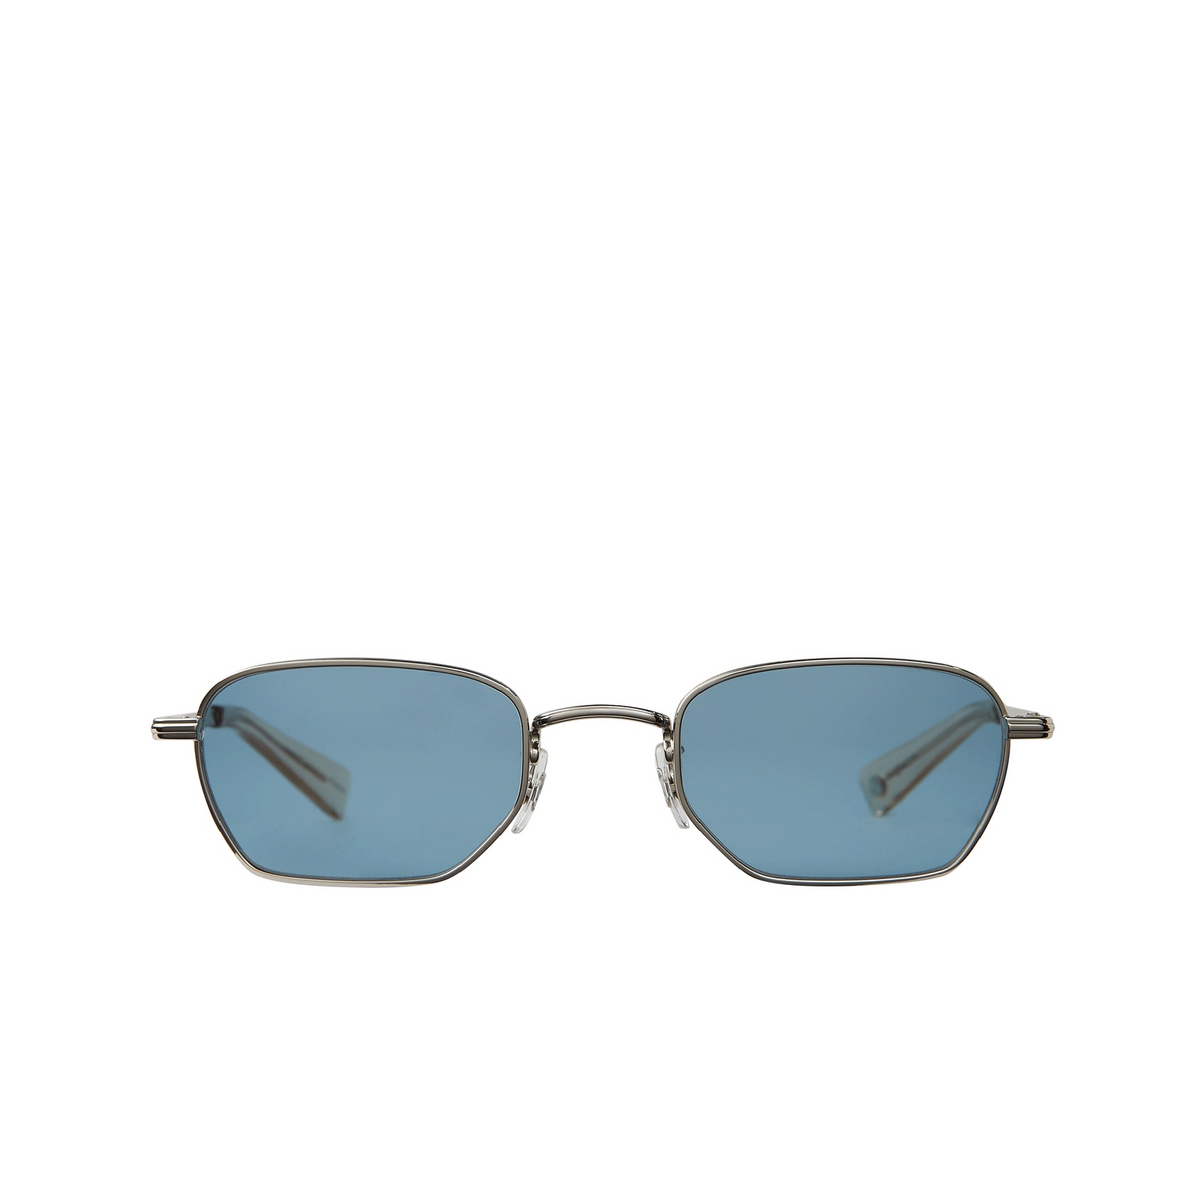 Garrett Leight HOLLY Sunglasses S-CH/PAC Silver-Champagne/Pacifica - front view